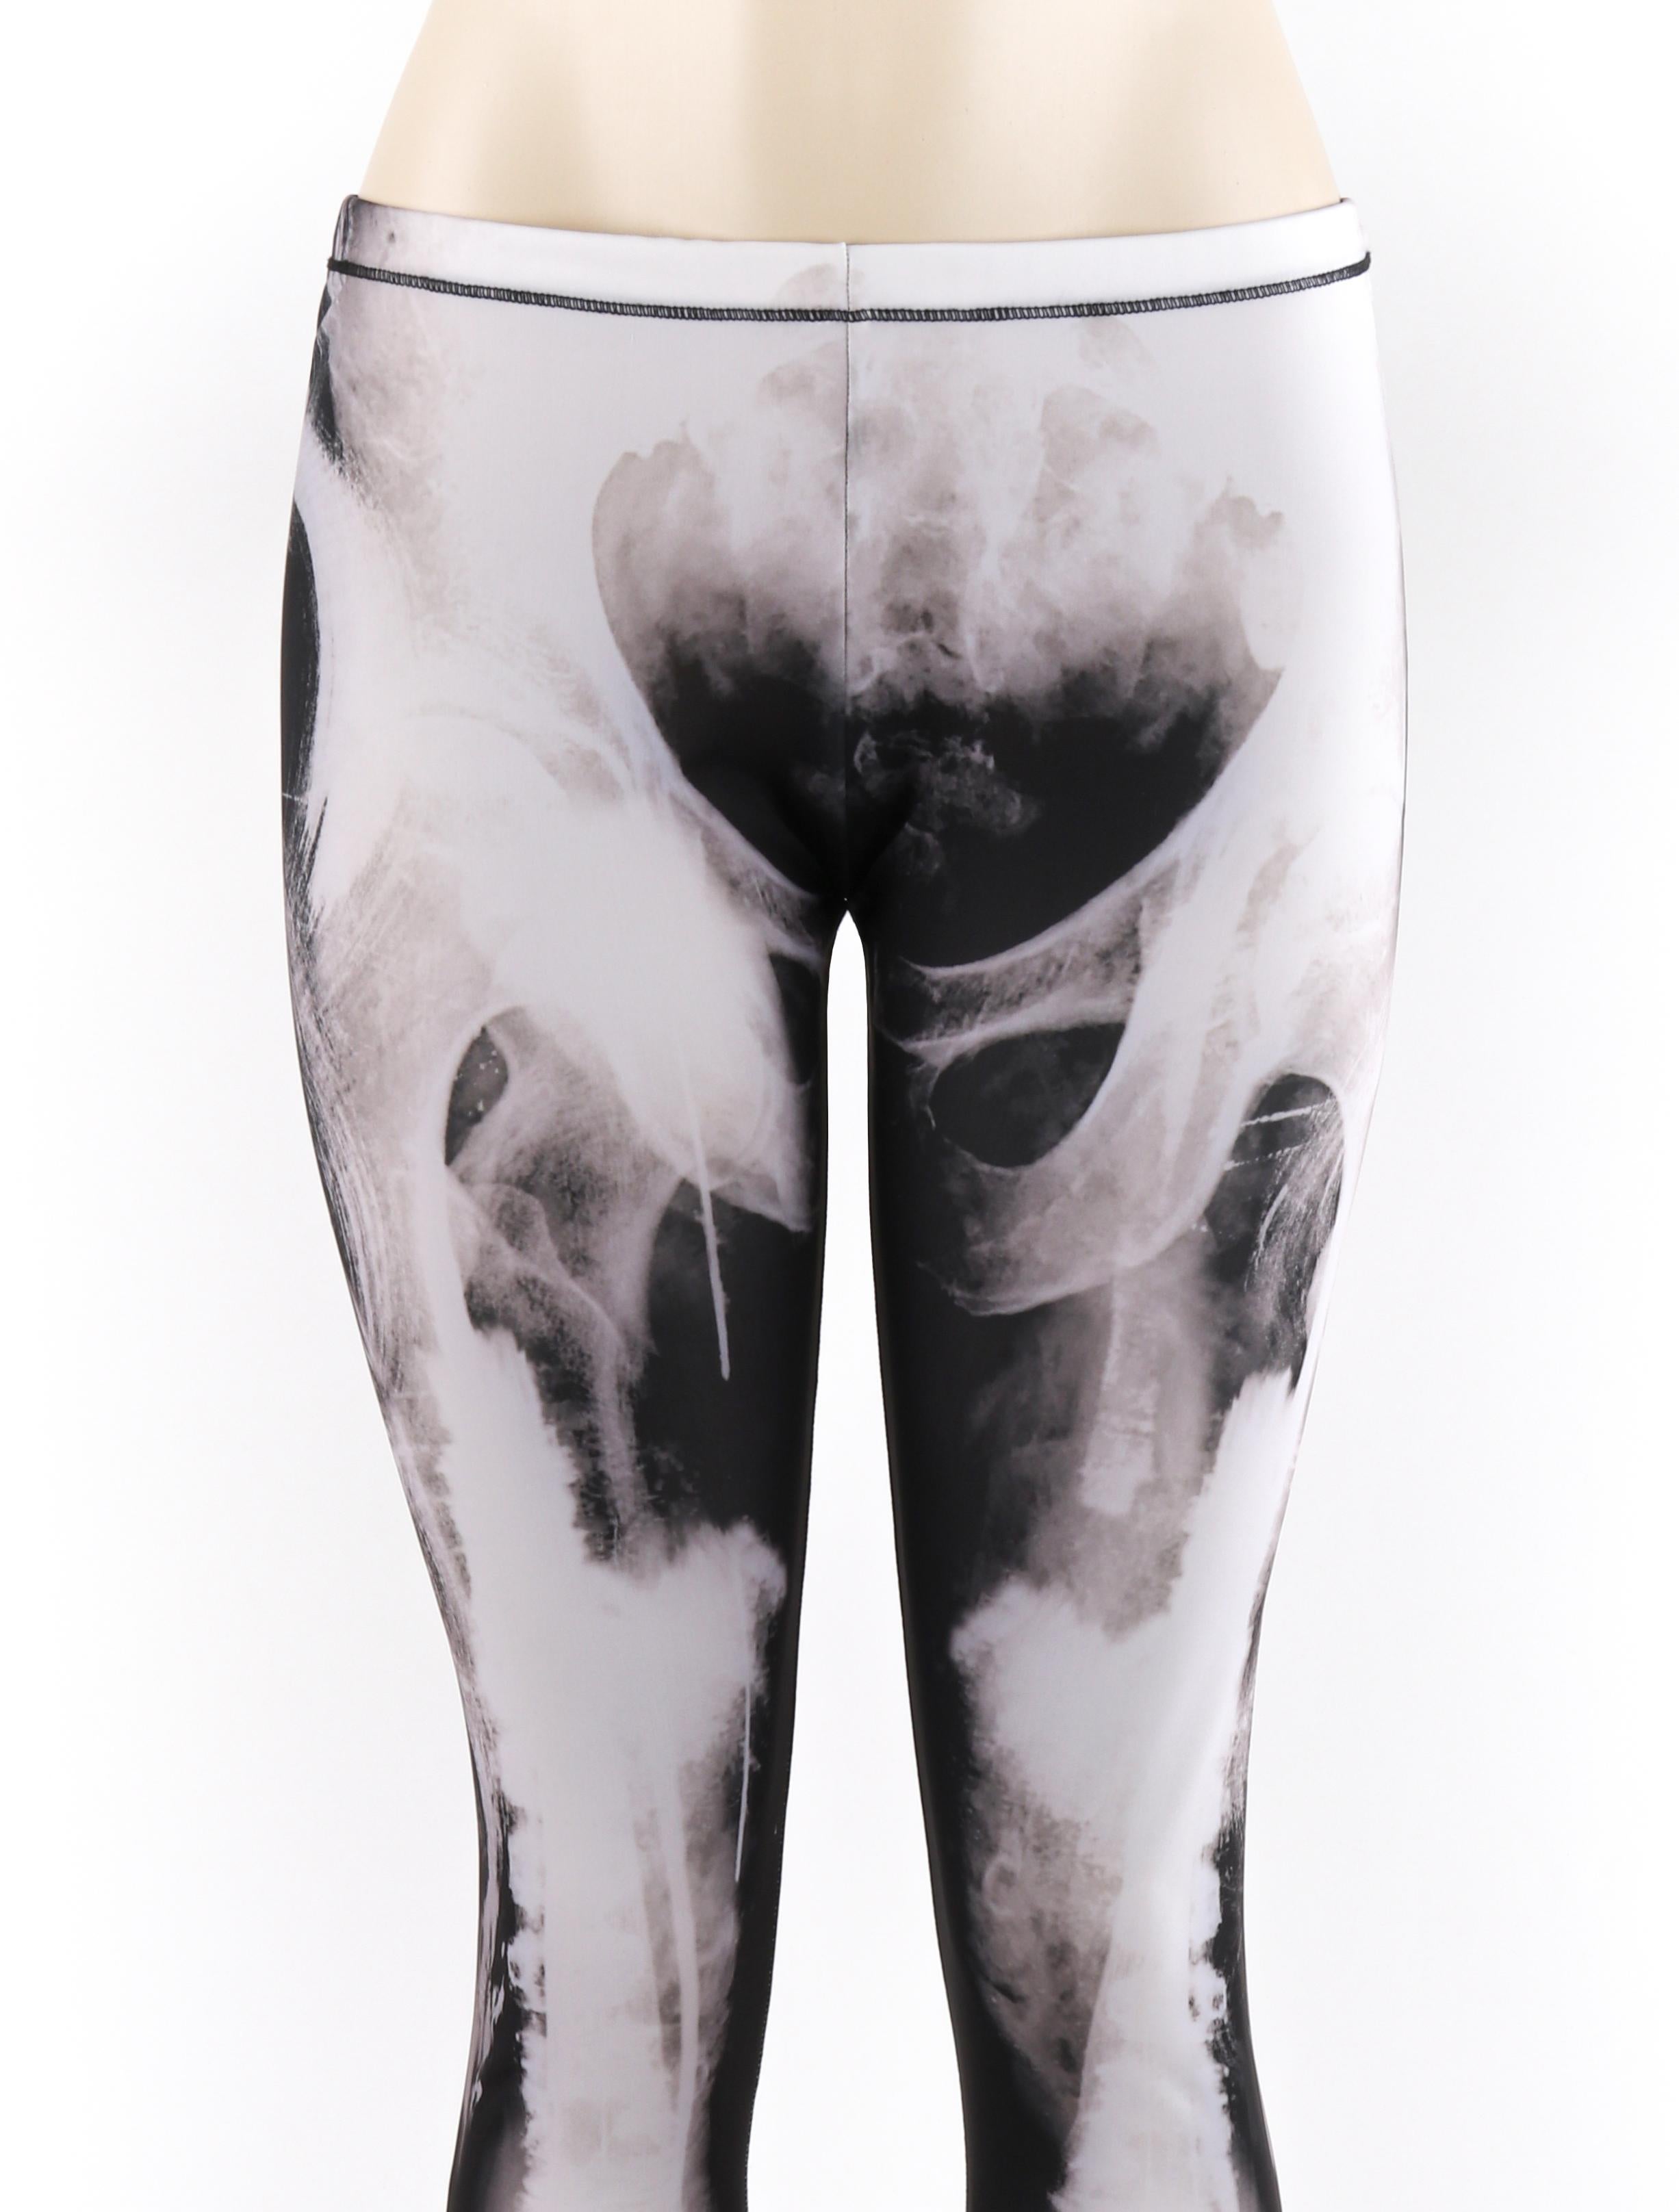 ALEXANDER McQUEEN 2012 Abstract X-Ray Skeleton Print Leggings Black White
 
Brand / Manufacturer: Alexander McQueen  / McQ
Circa: 2012
Style: Leggings
Color(s): Shades of black, white
Lined: No
Marked Fabric Content: 80% Polyester, 20%